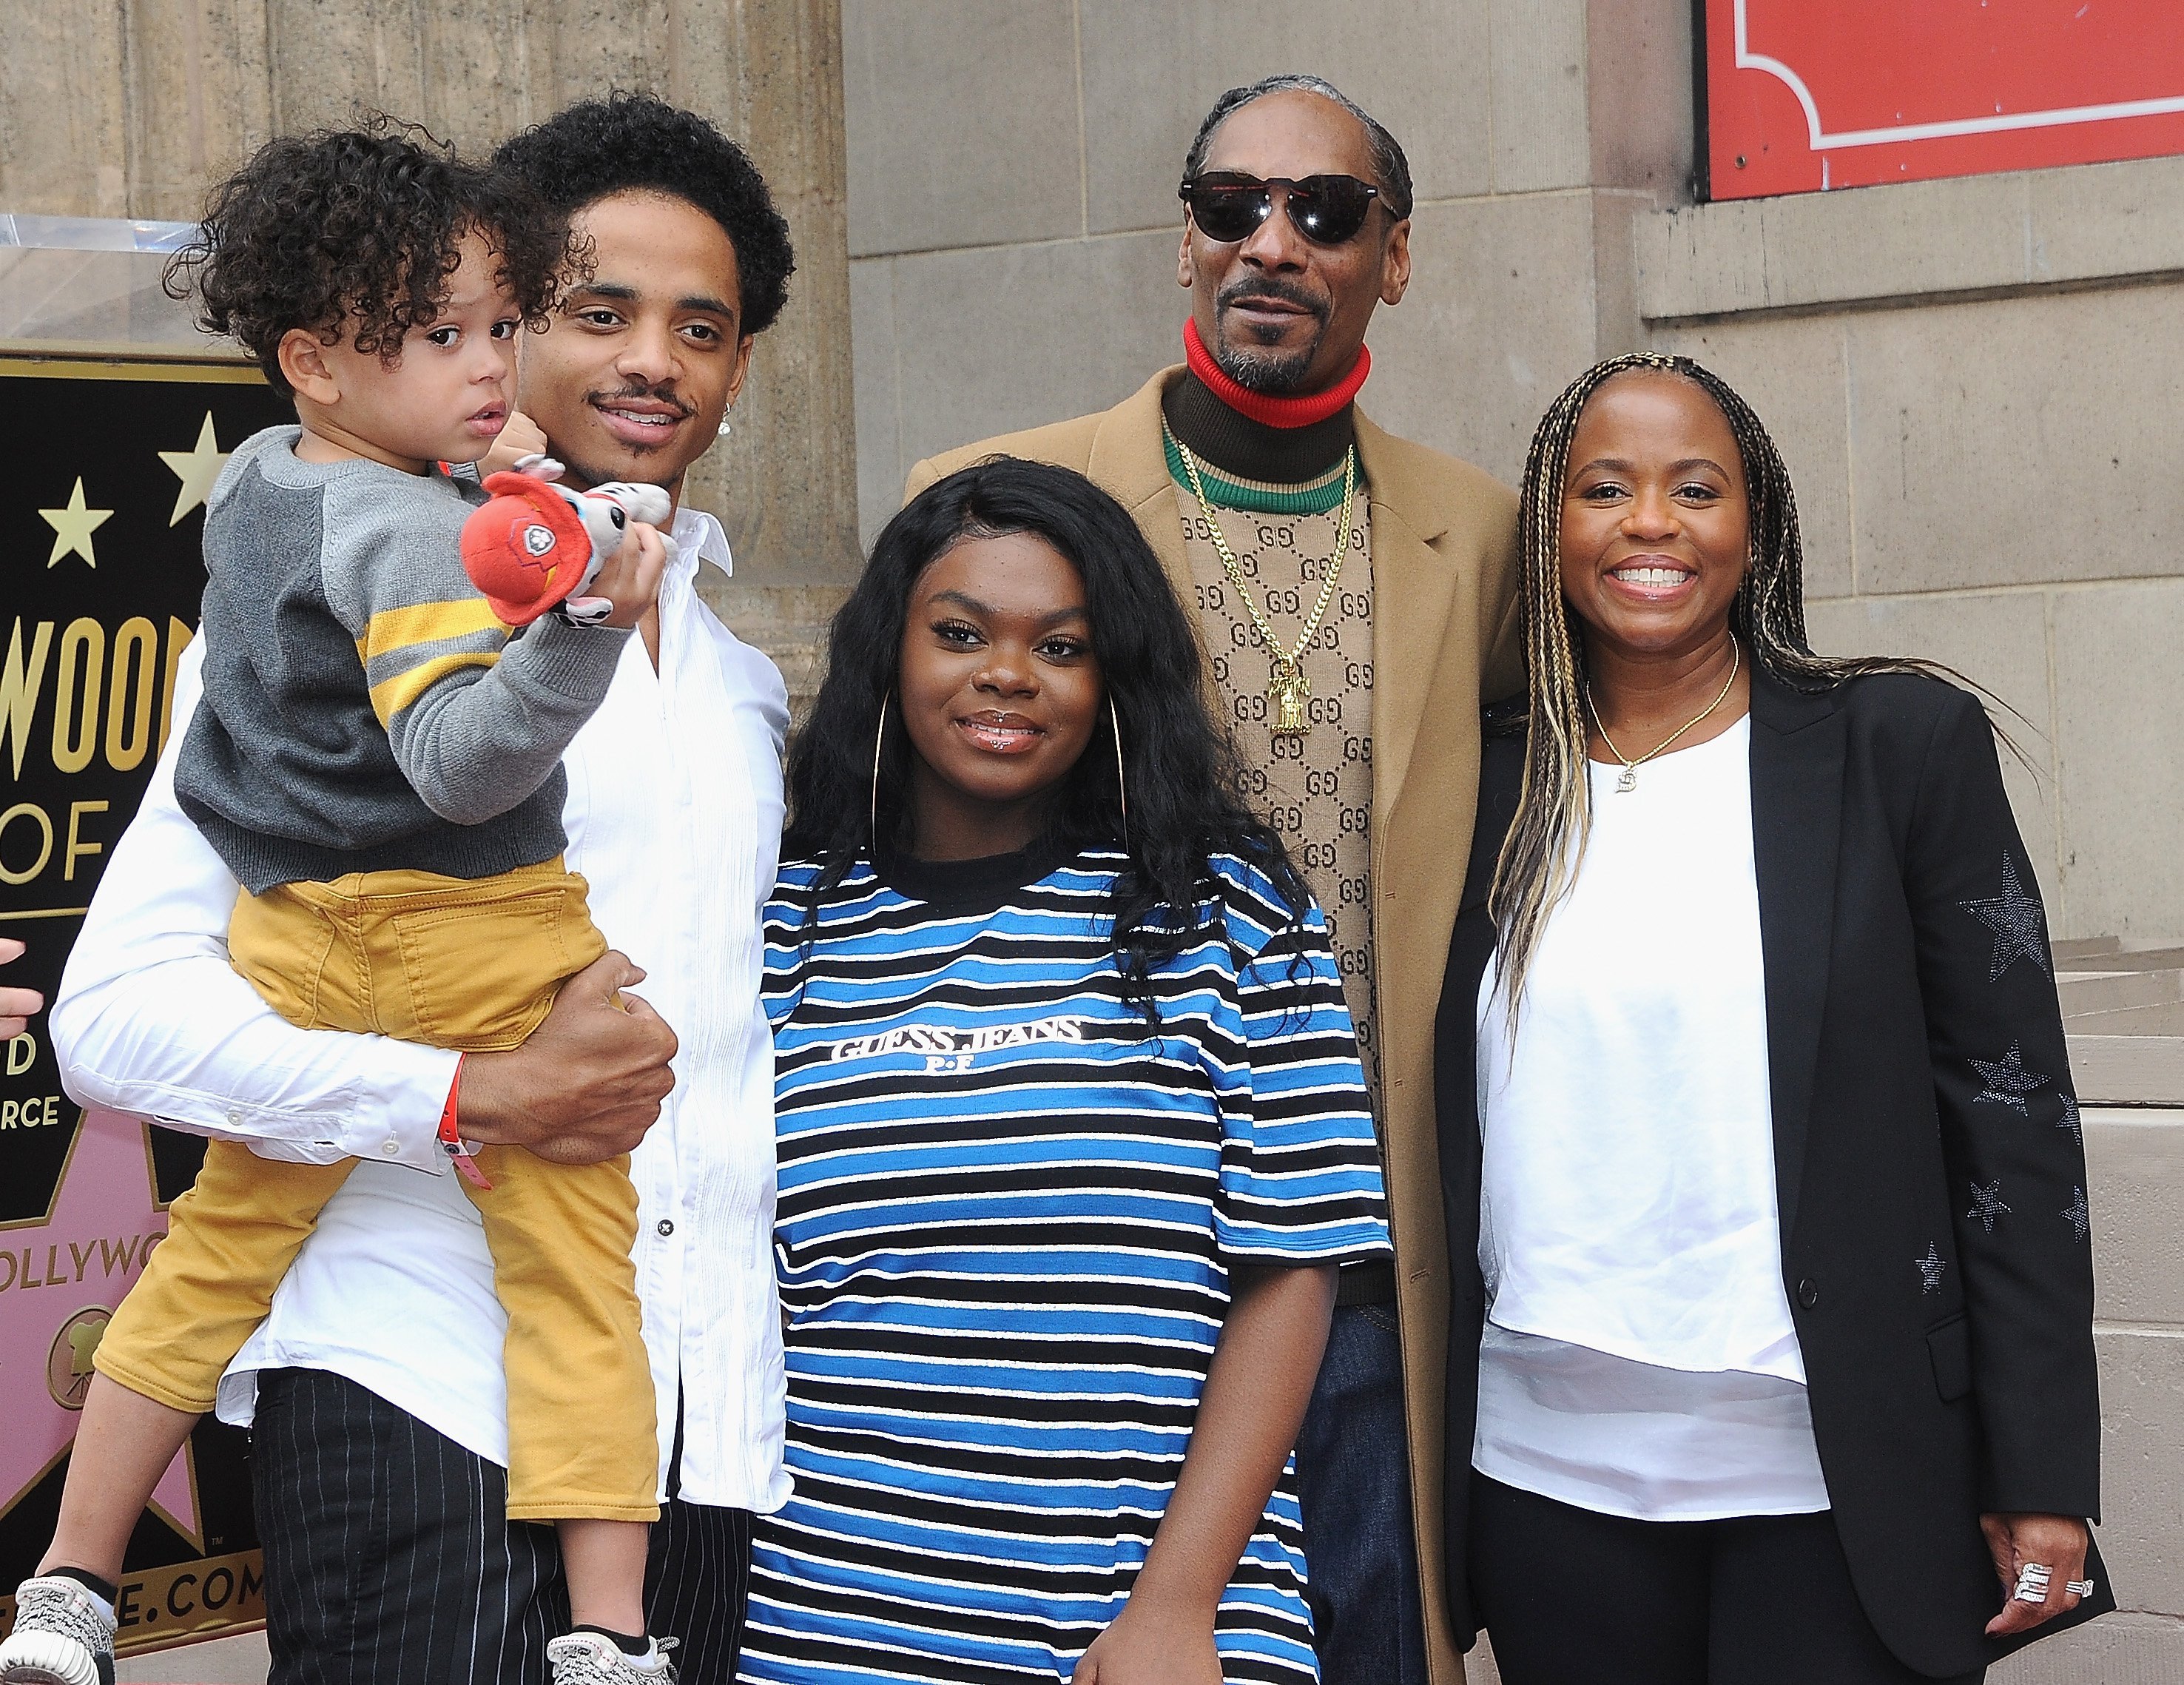 Snoop Dogg and Shante Taylor with family attends Snoop Dogg's star ceremony on The Hollywood Walk of Fame held on November 19, 2018. | Photo: GettyImages